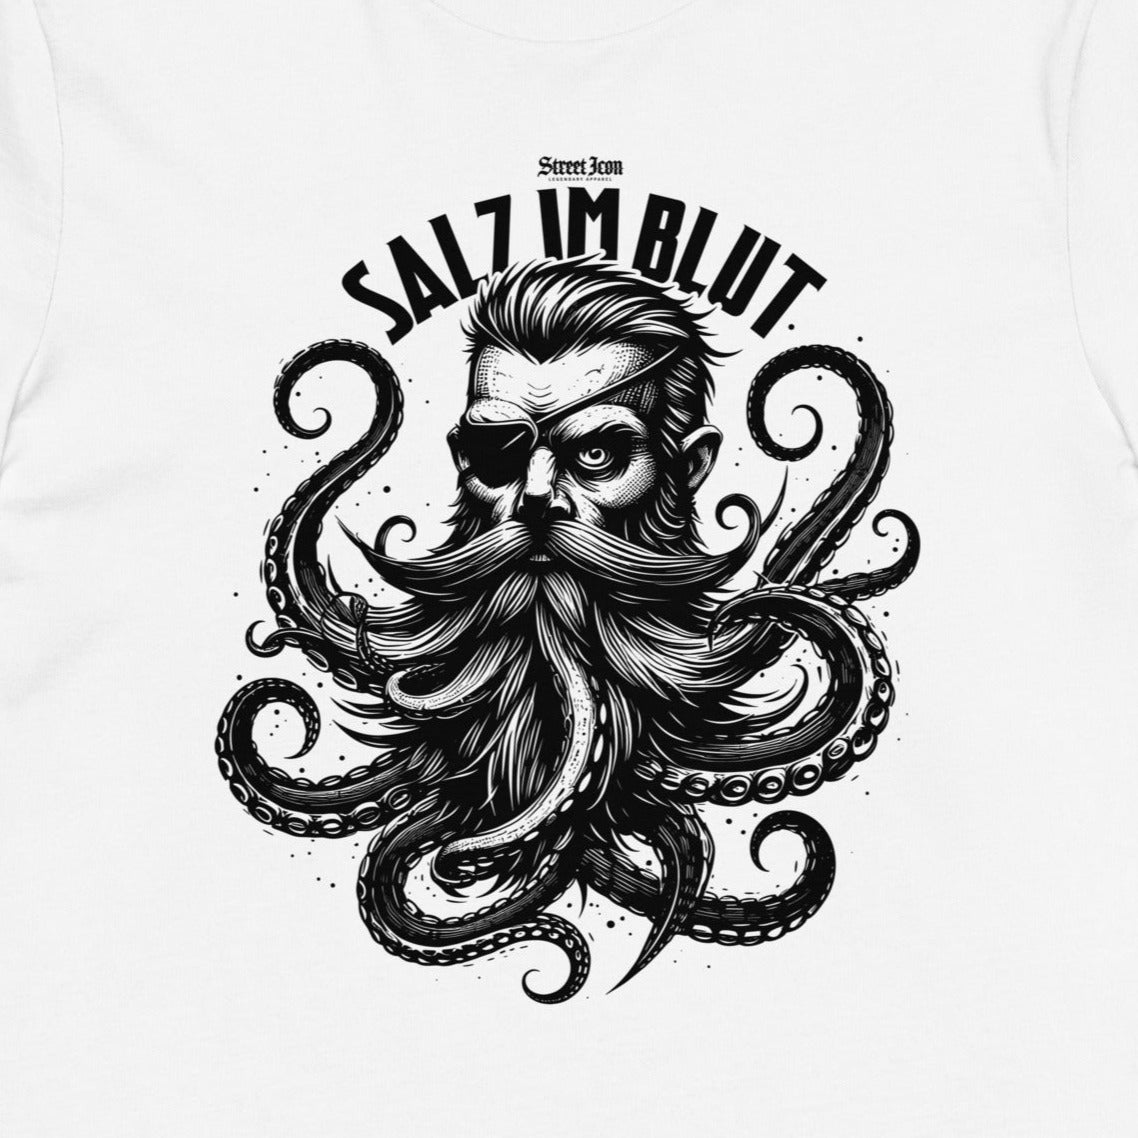 Octopus pirate with salt in his blood - Premium T-Shirt